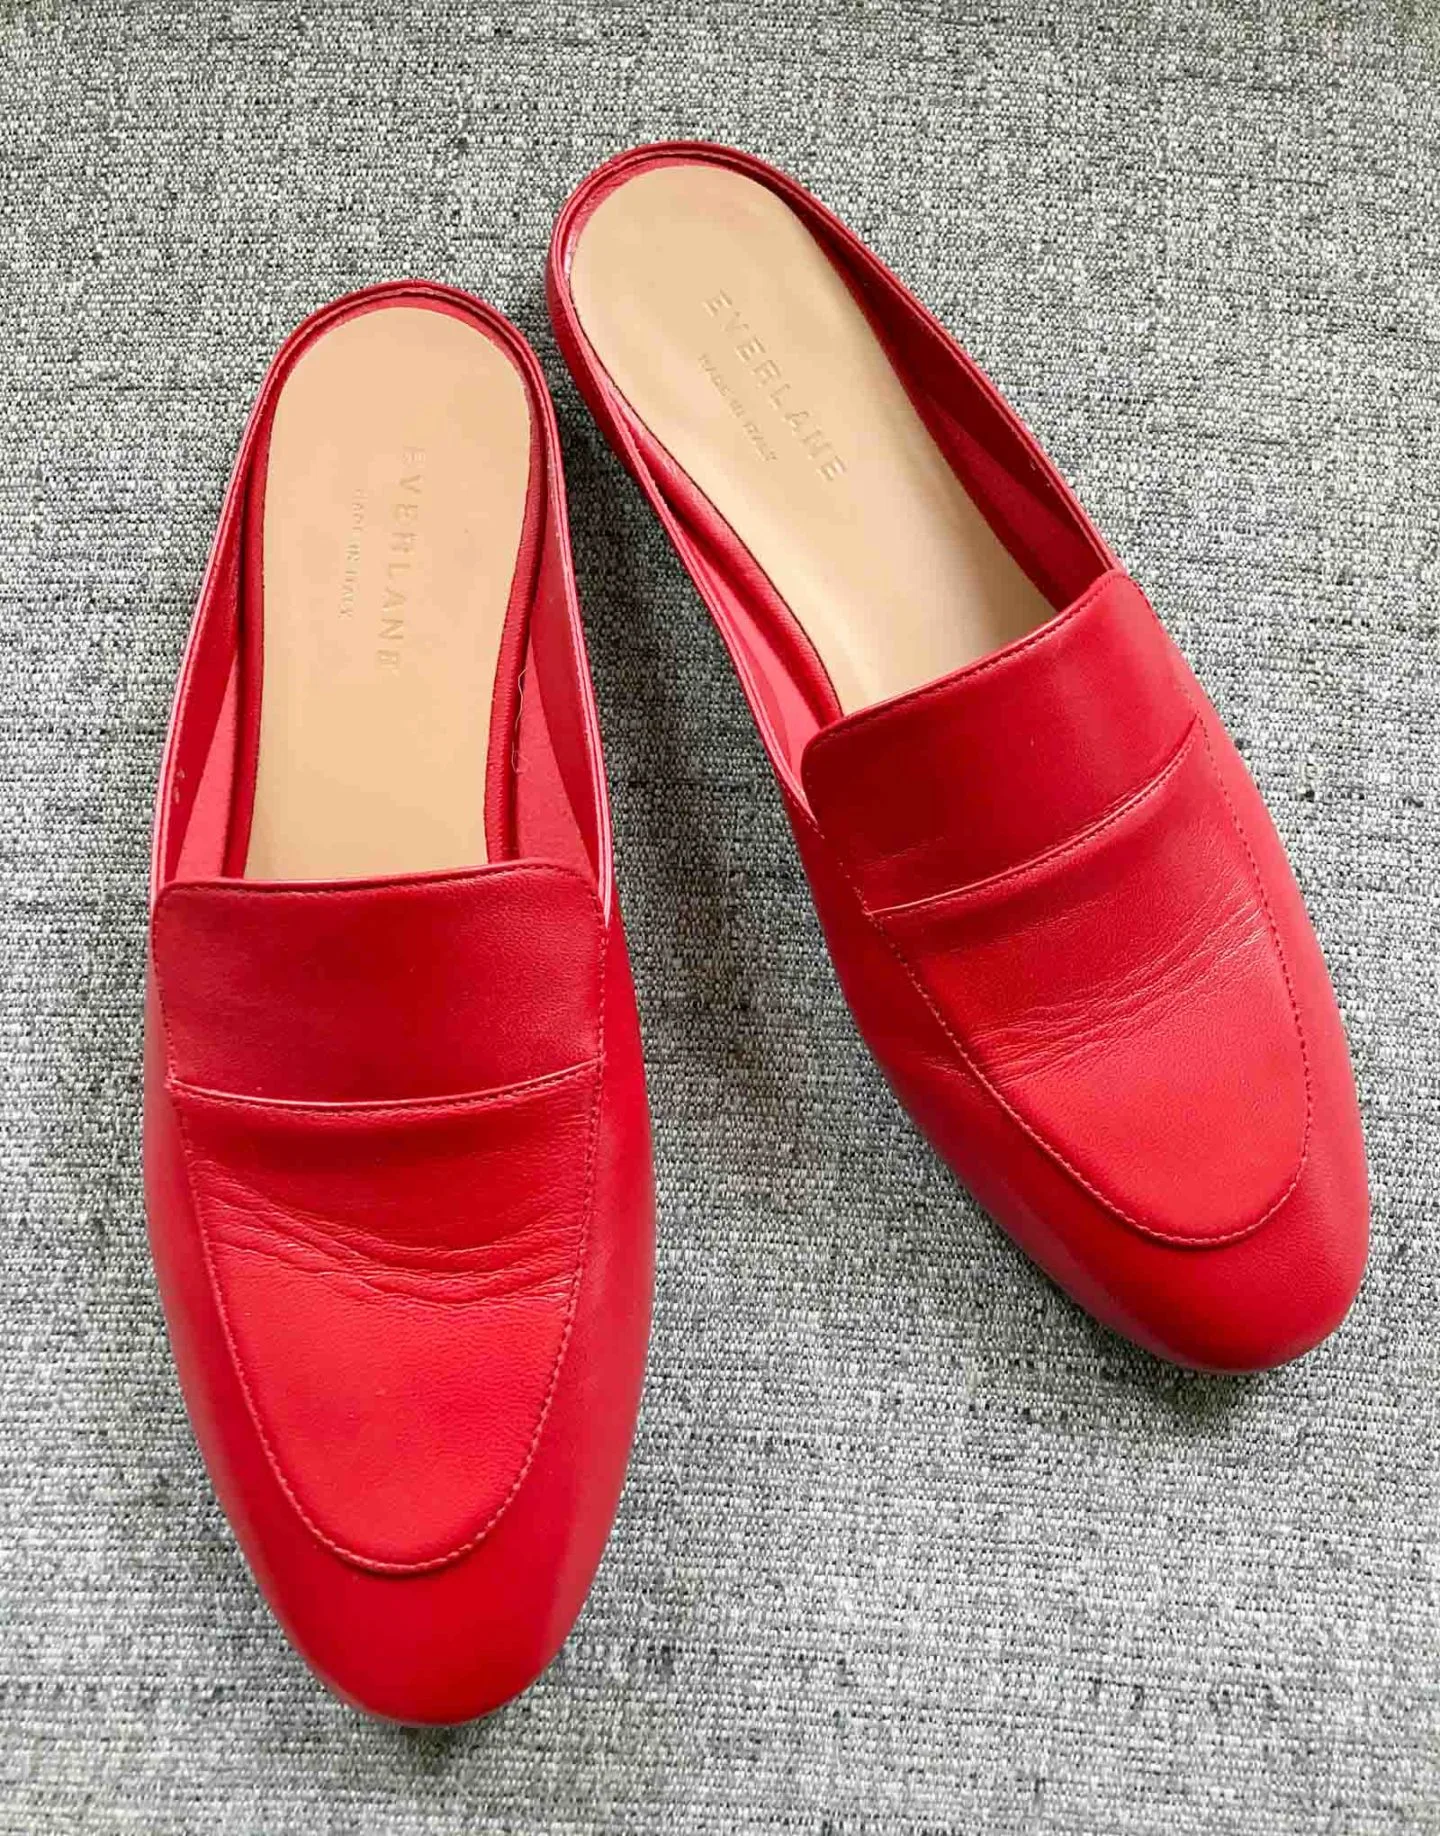 everlane day loafer mule review